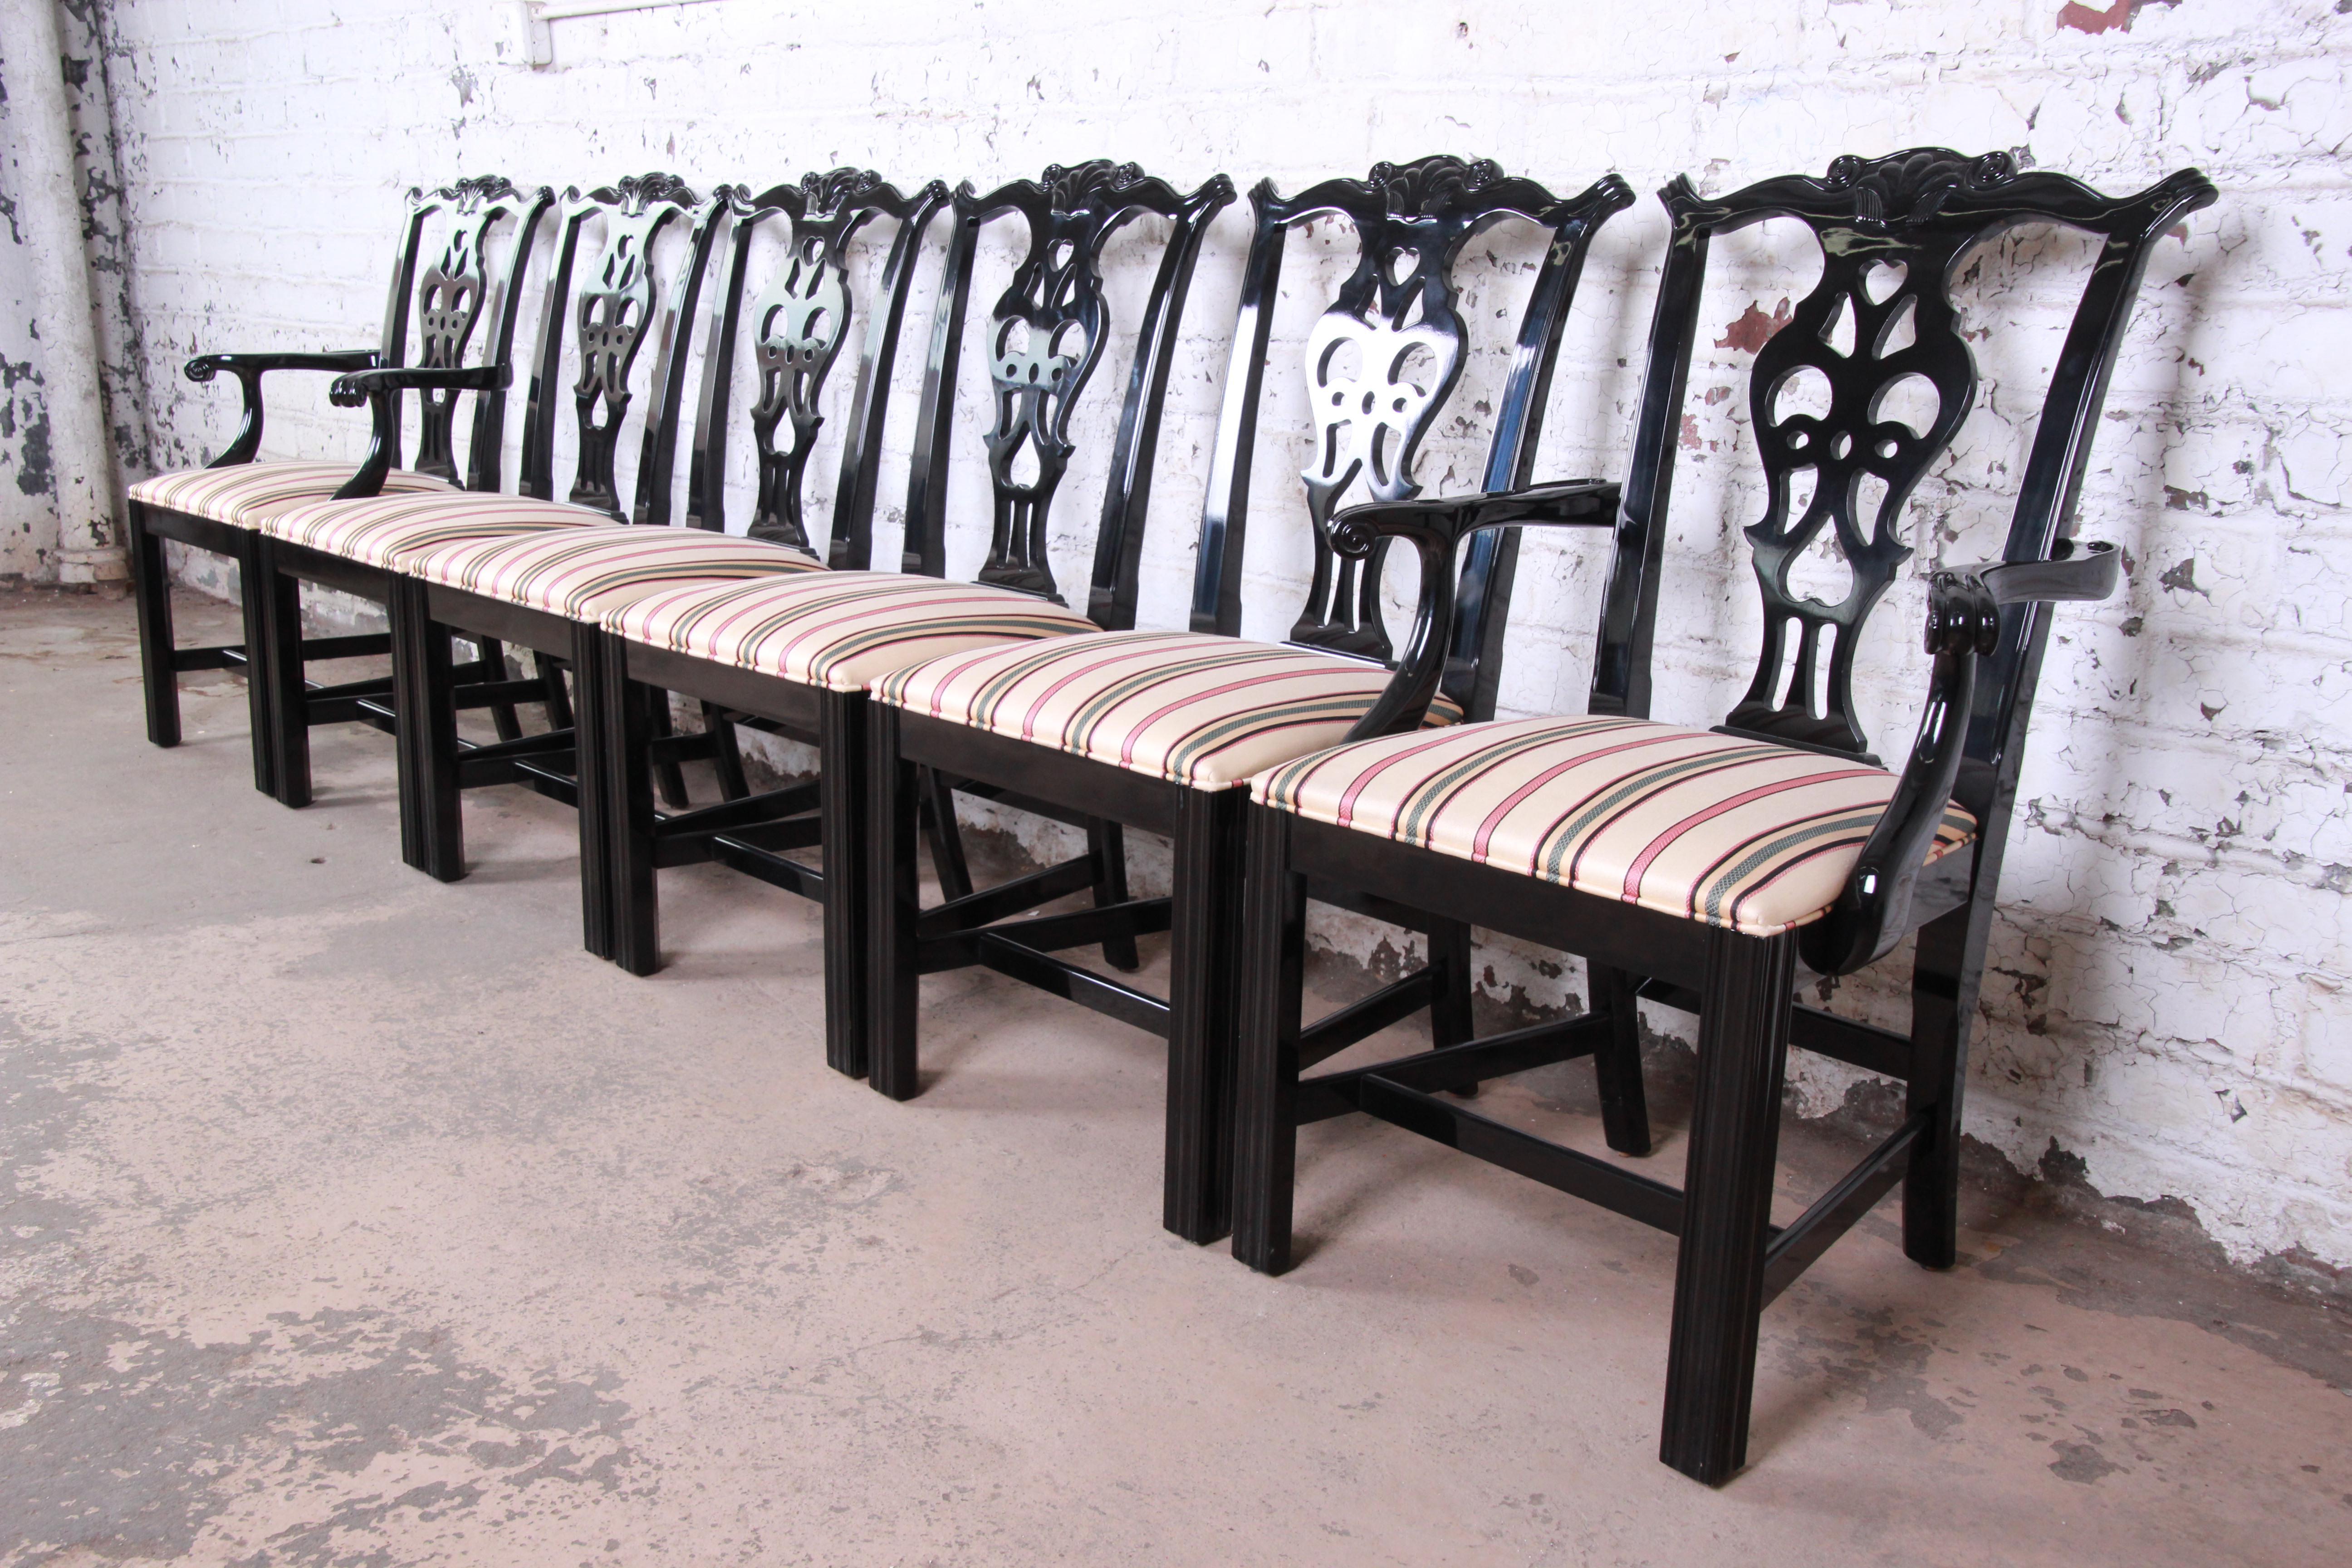 A beautiful set of black lacquered Chippendale style dining chairs by Century Furniture. The set includes two captain armchairs and four side chairs. The chairs feature solid wood construction with nice carved details and a high gloss black